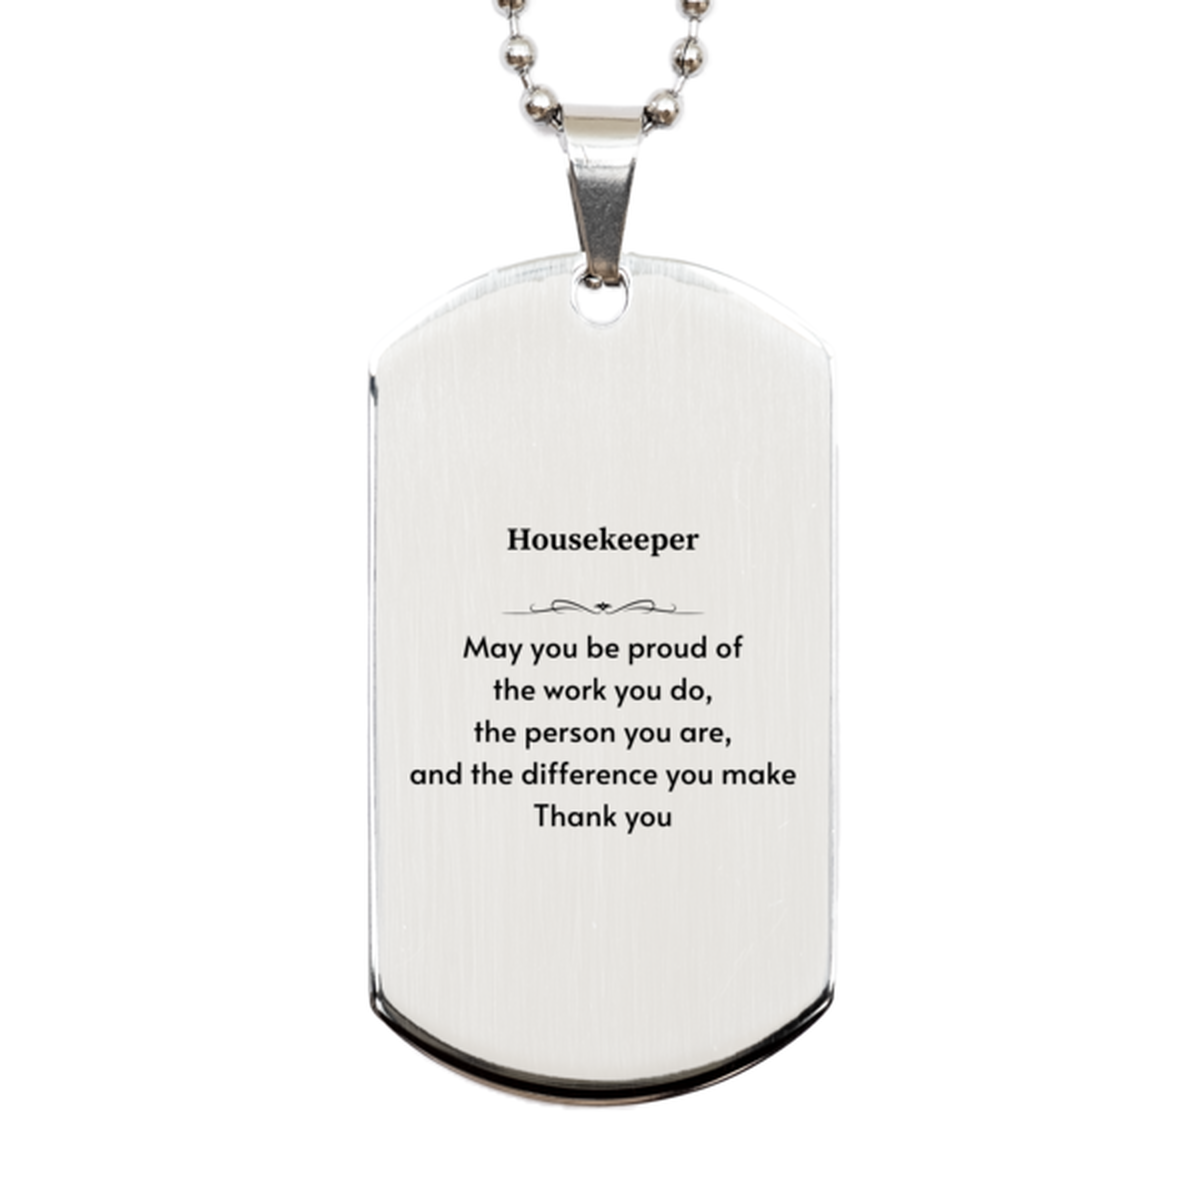 Heartwarming Silver Dog Tag Retirement Coworkers Gifts for Housekeeper, Housekeeper May You be proud of the work you do, the person you are Gifts for Boss Men Women Friends